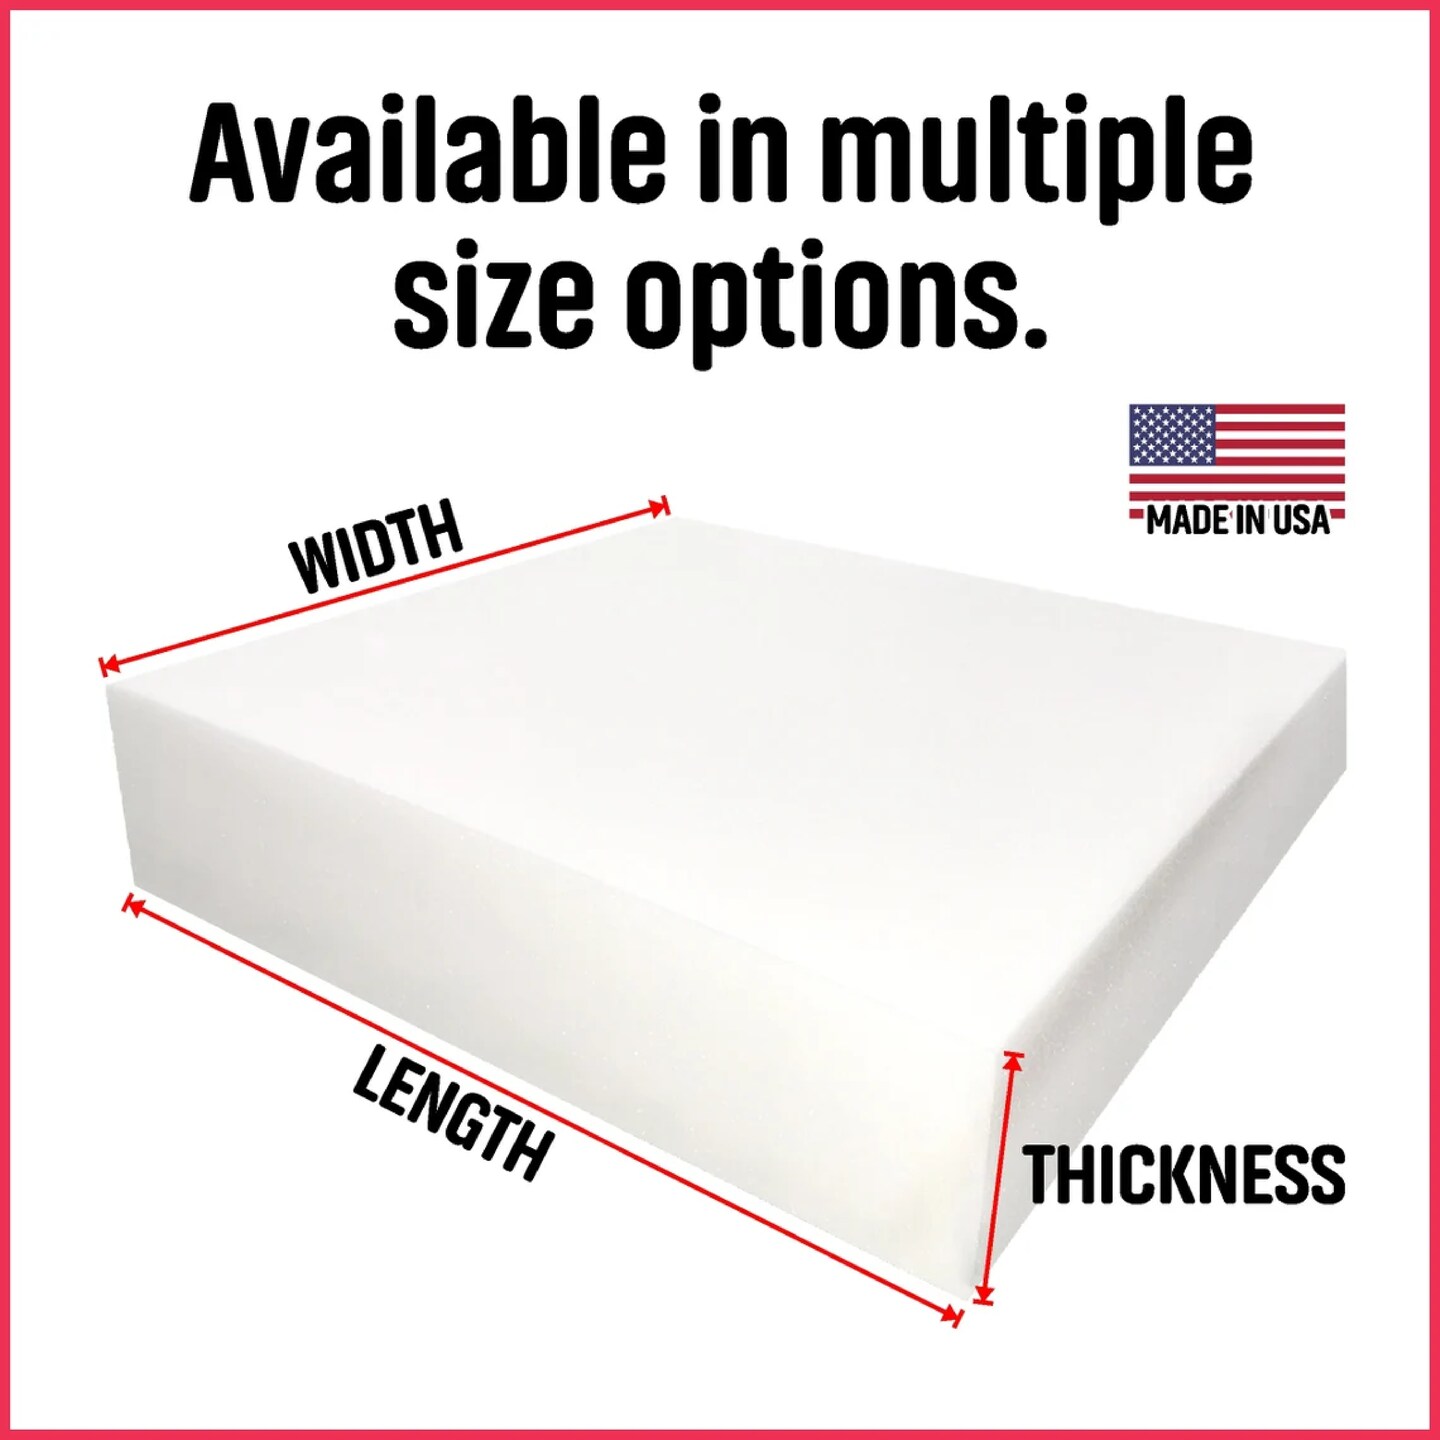 3 thick - High Density Upholstery Foam - Custom Sizes and Shapes